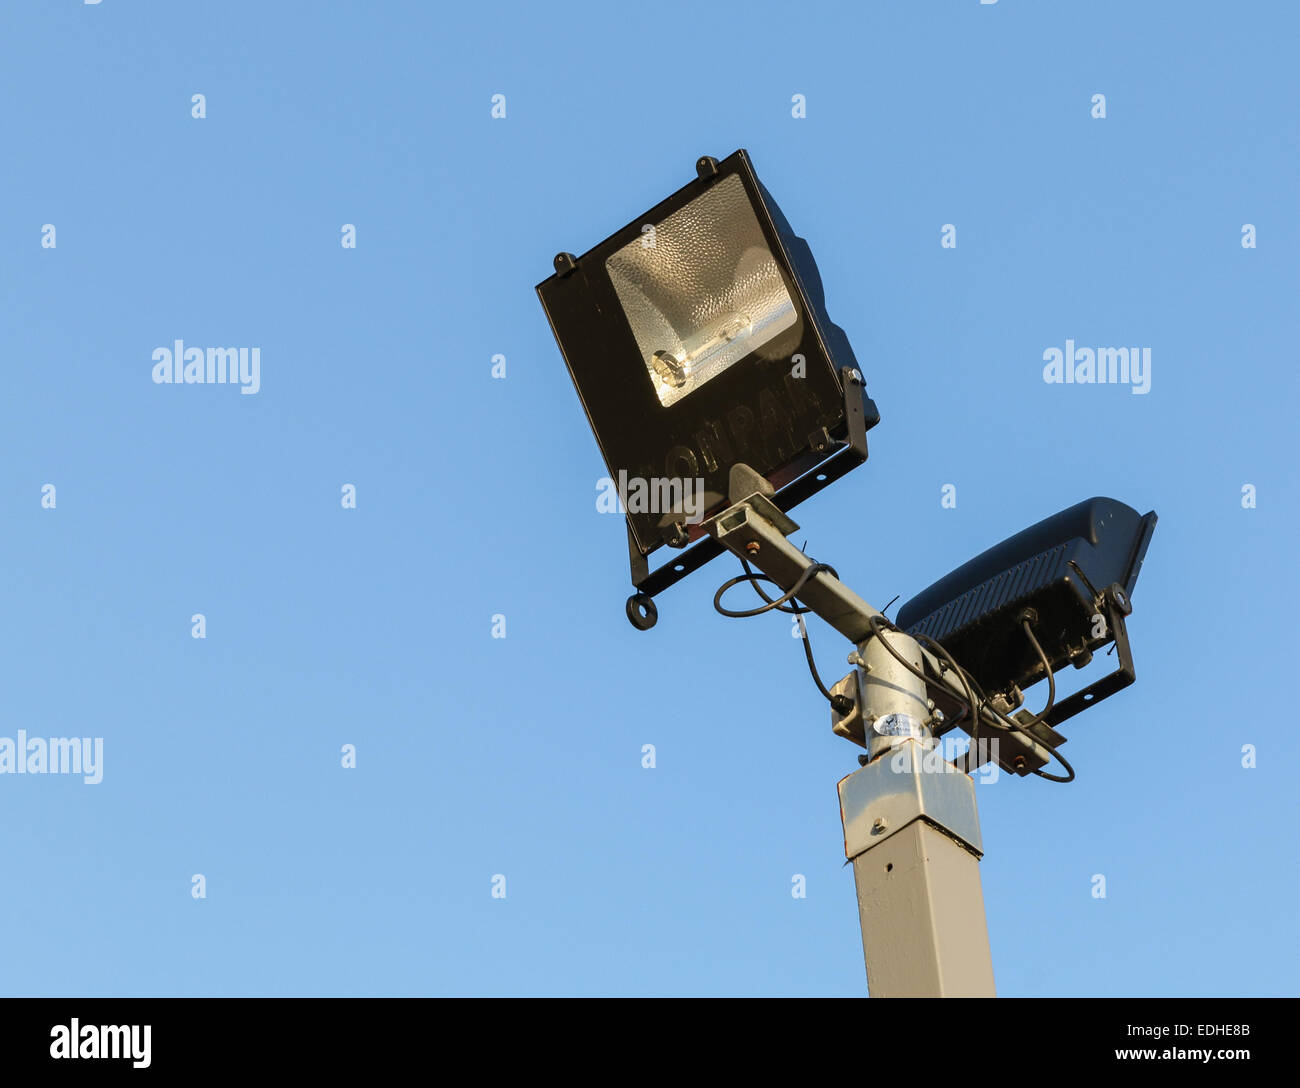 Security floodlights on a tall post against a winter blue sky at a UK shopping centre Stock Photo